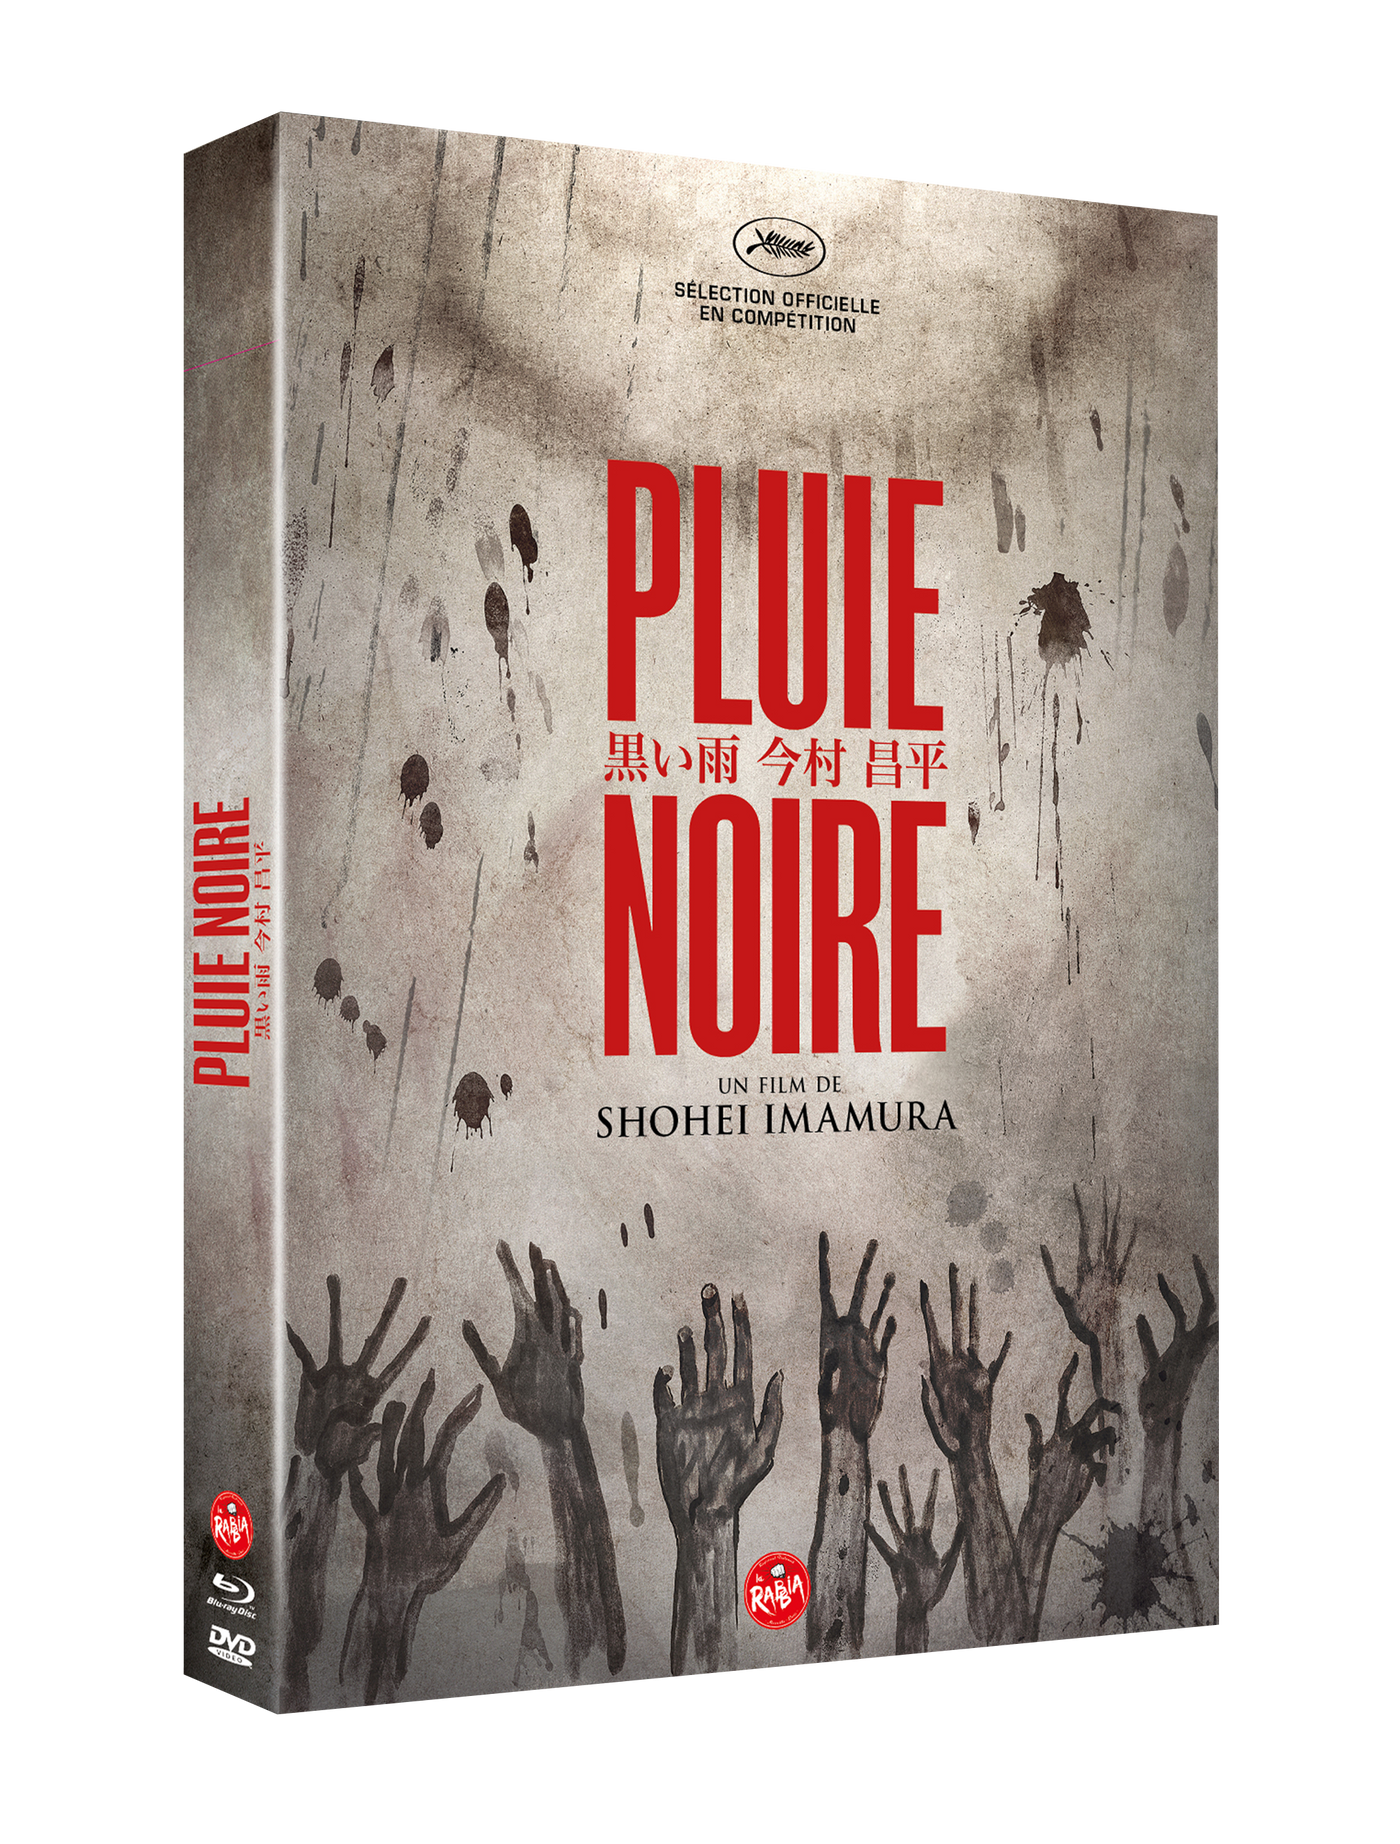 Digipack collector (DVD + Blu-Ray) "Pluie Noire"